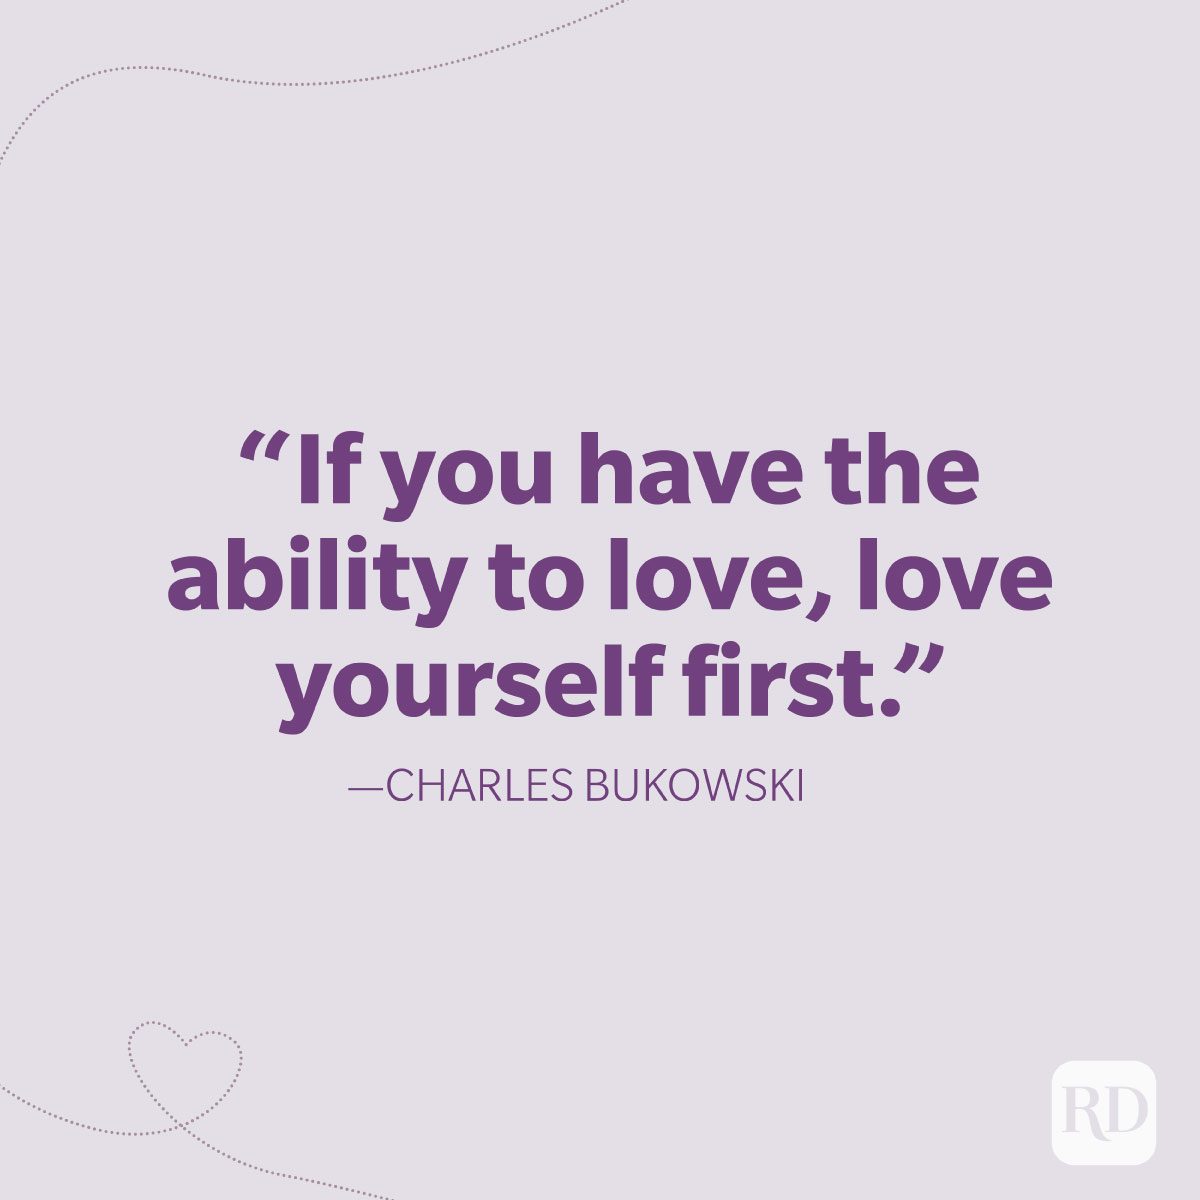 learn to love yourself quotes